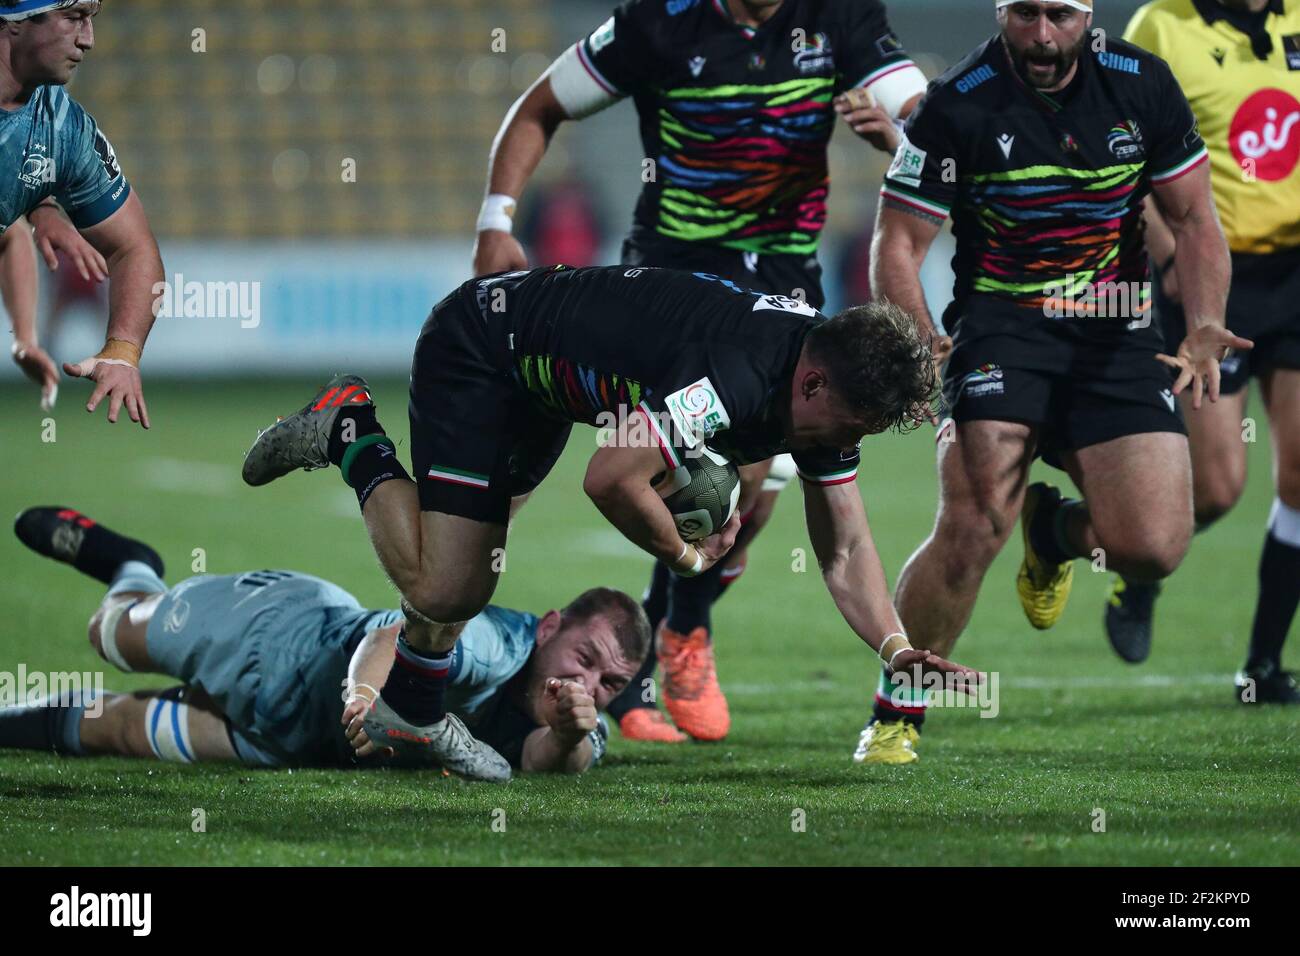 Parma, Italy. 12th Mar, 2021. Jamie Elliot (Zebre Rugby Club) during Zebre  vs Leinster Rugby, Rugby Guinness Pro 14 match in Parma, Italy, March 12  2021 Credit: Independent Photo Agency/Alamy Live News